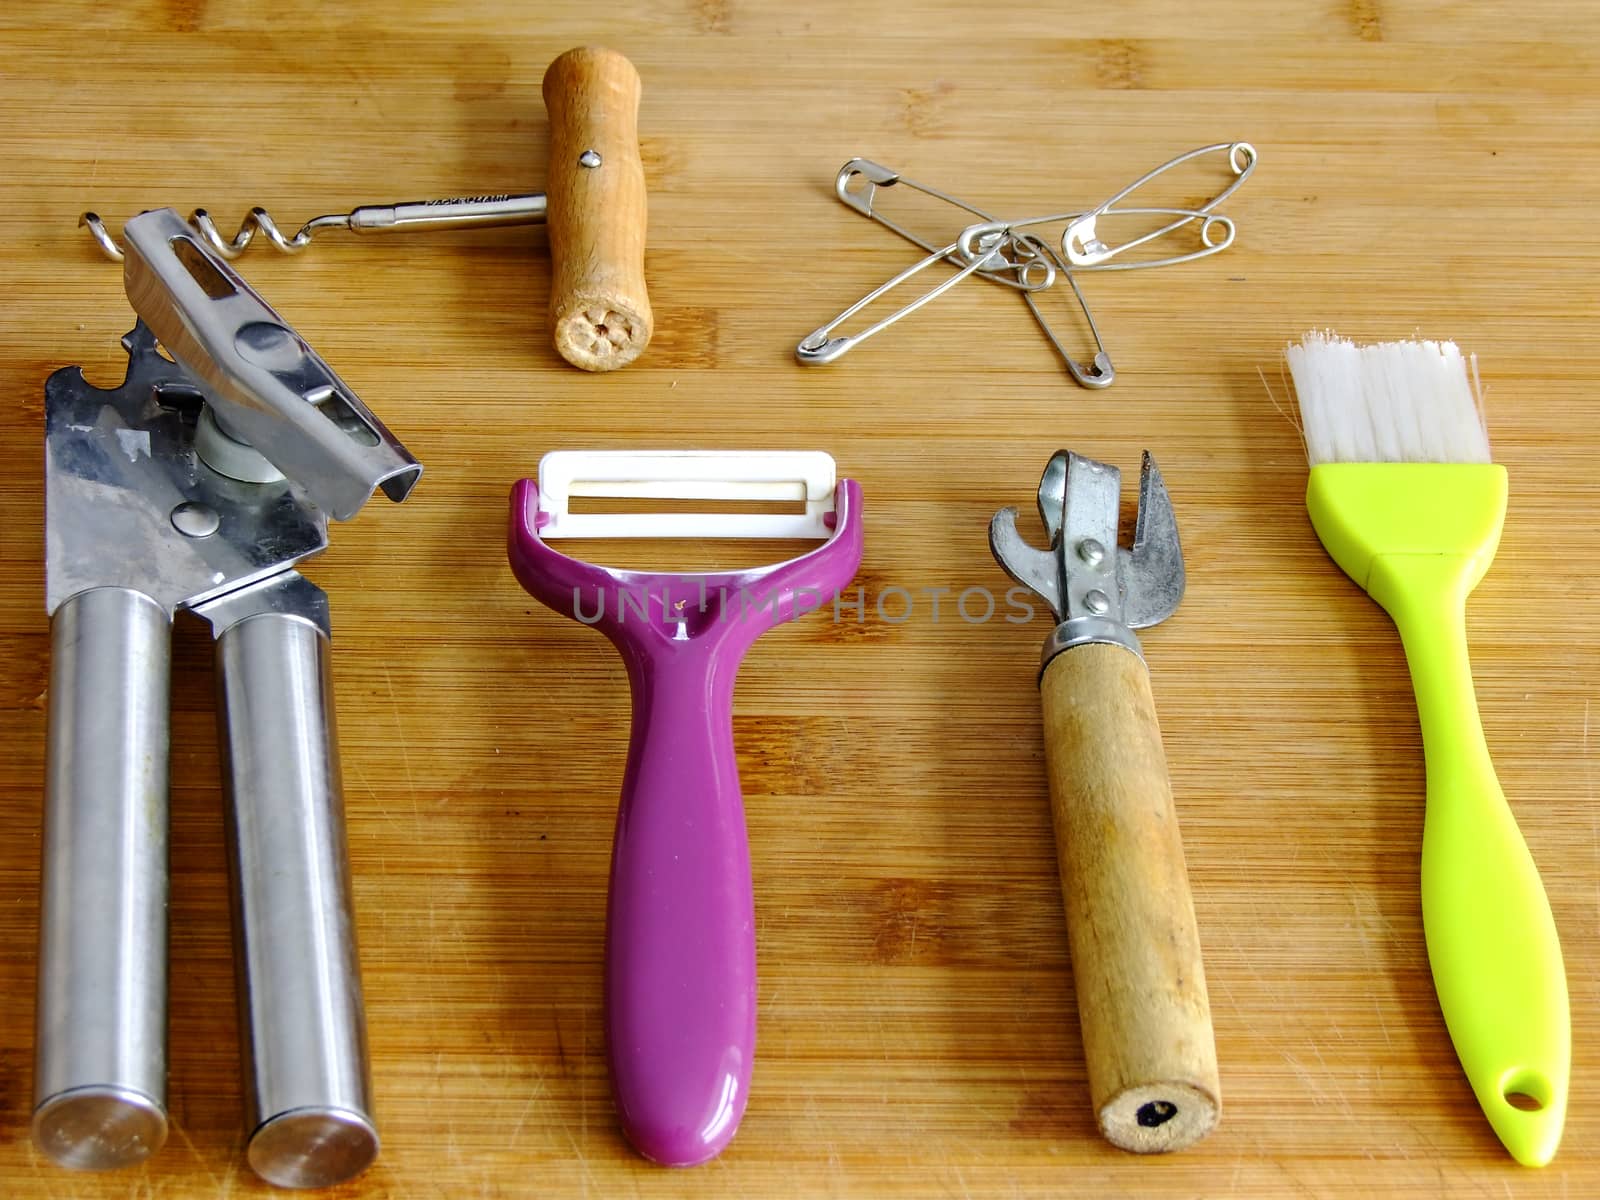 Two different Can Openers, Brush, Potato Peeler, Bottle Opener and Safety Pins on wooden Cutting Board